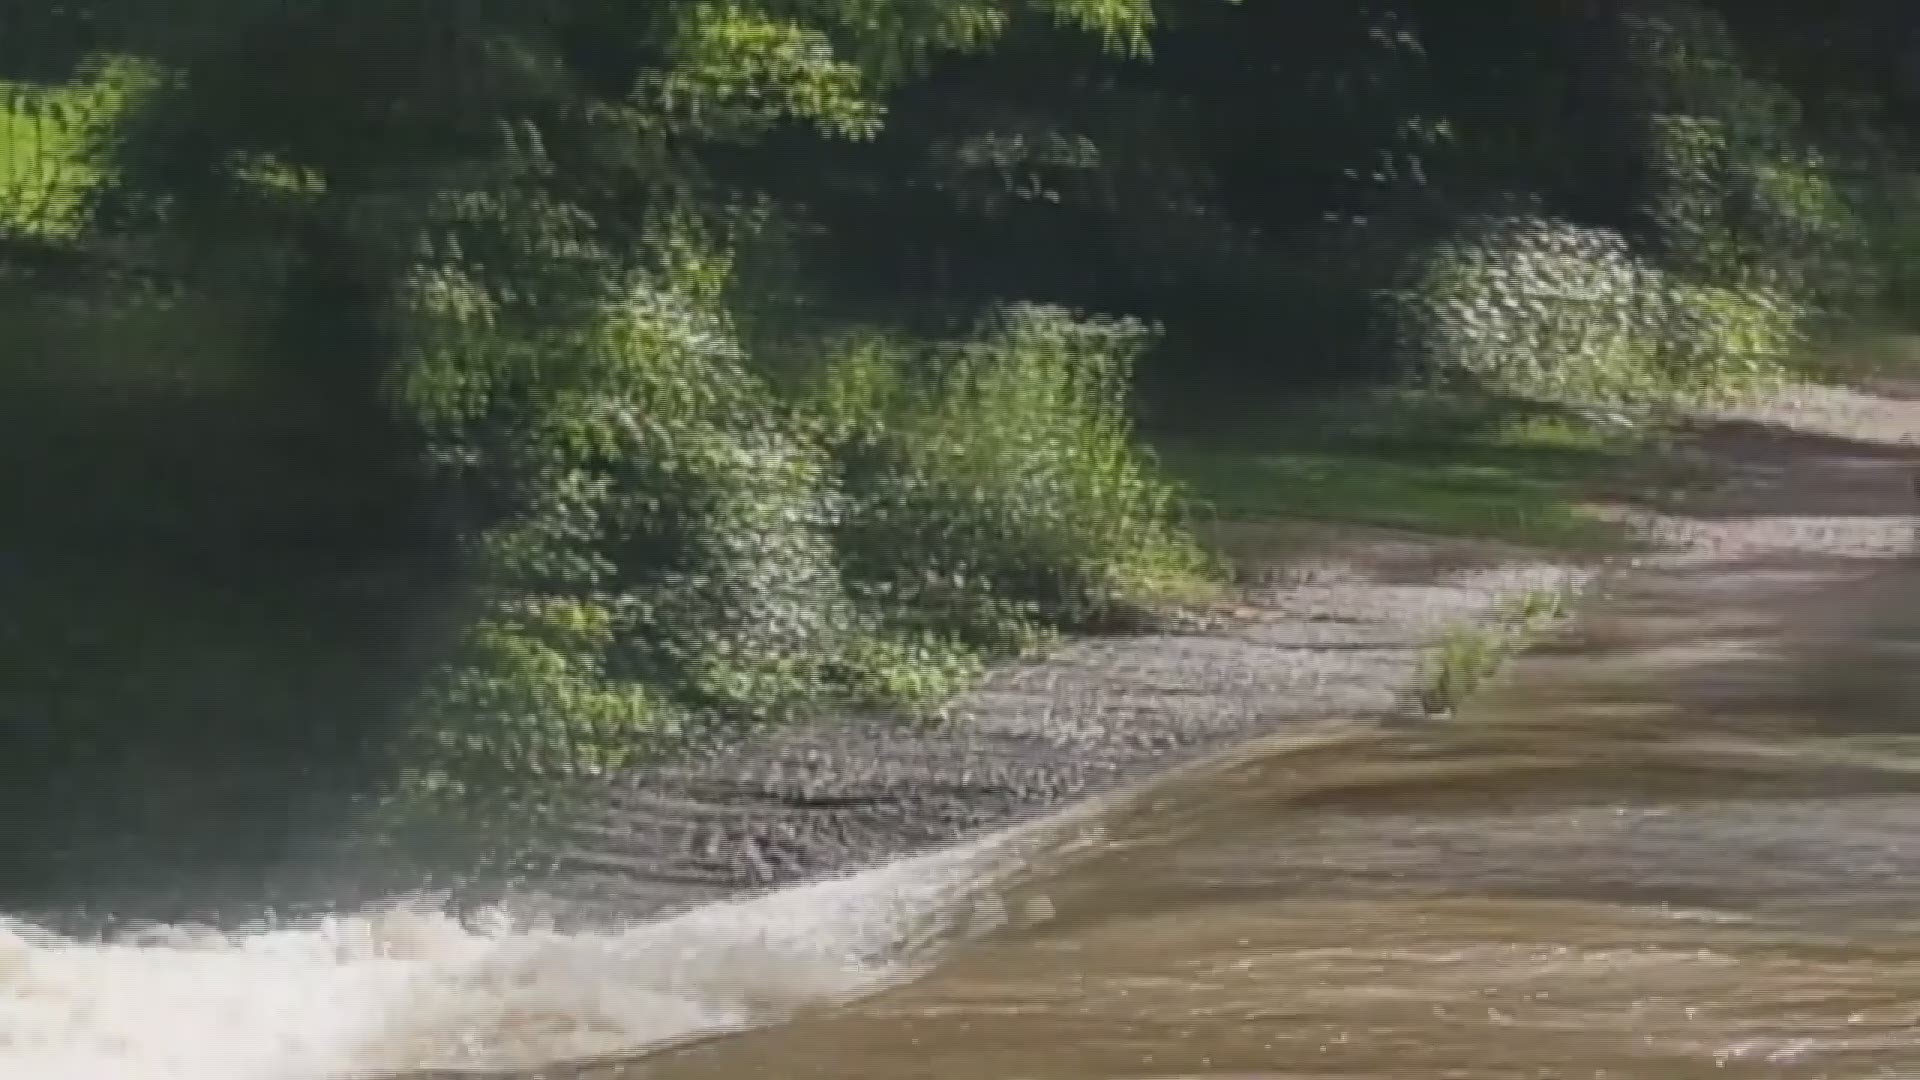 A water rescue happened Thursday off Highway 74 East in Searcy County. The Arkansas Game and Fish Commission completed the water rescue with help from local officials. Video credit: Brian Ragland